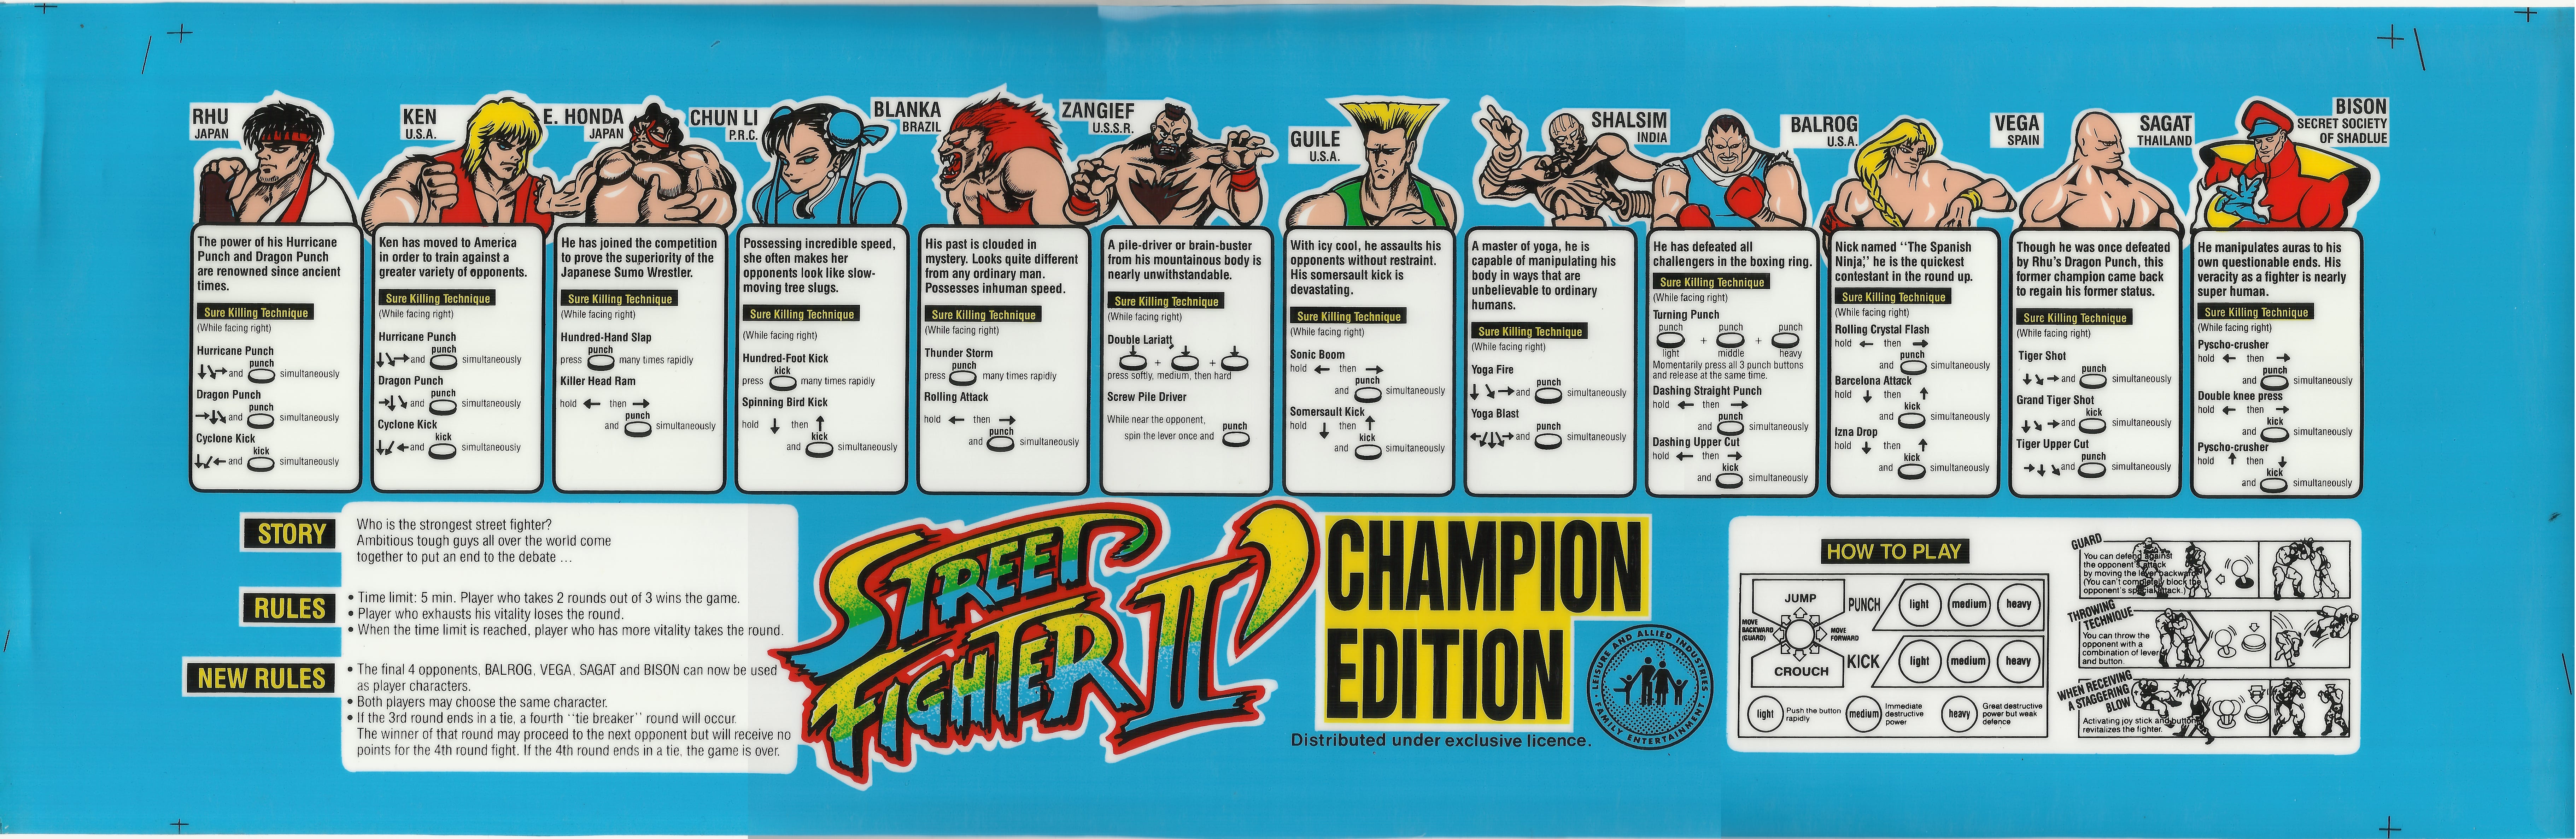 Street Fighter II': Champion Edition - Arcade - Commands/Moves